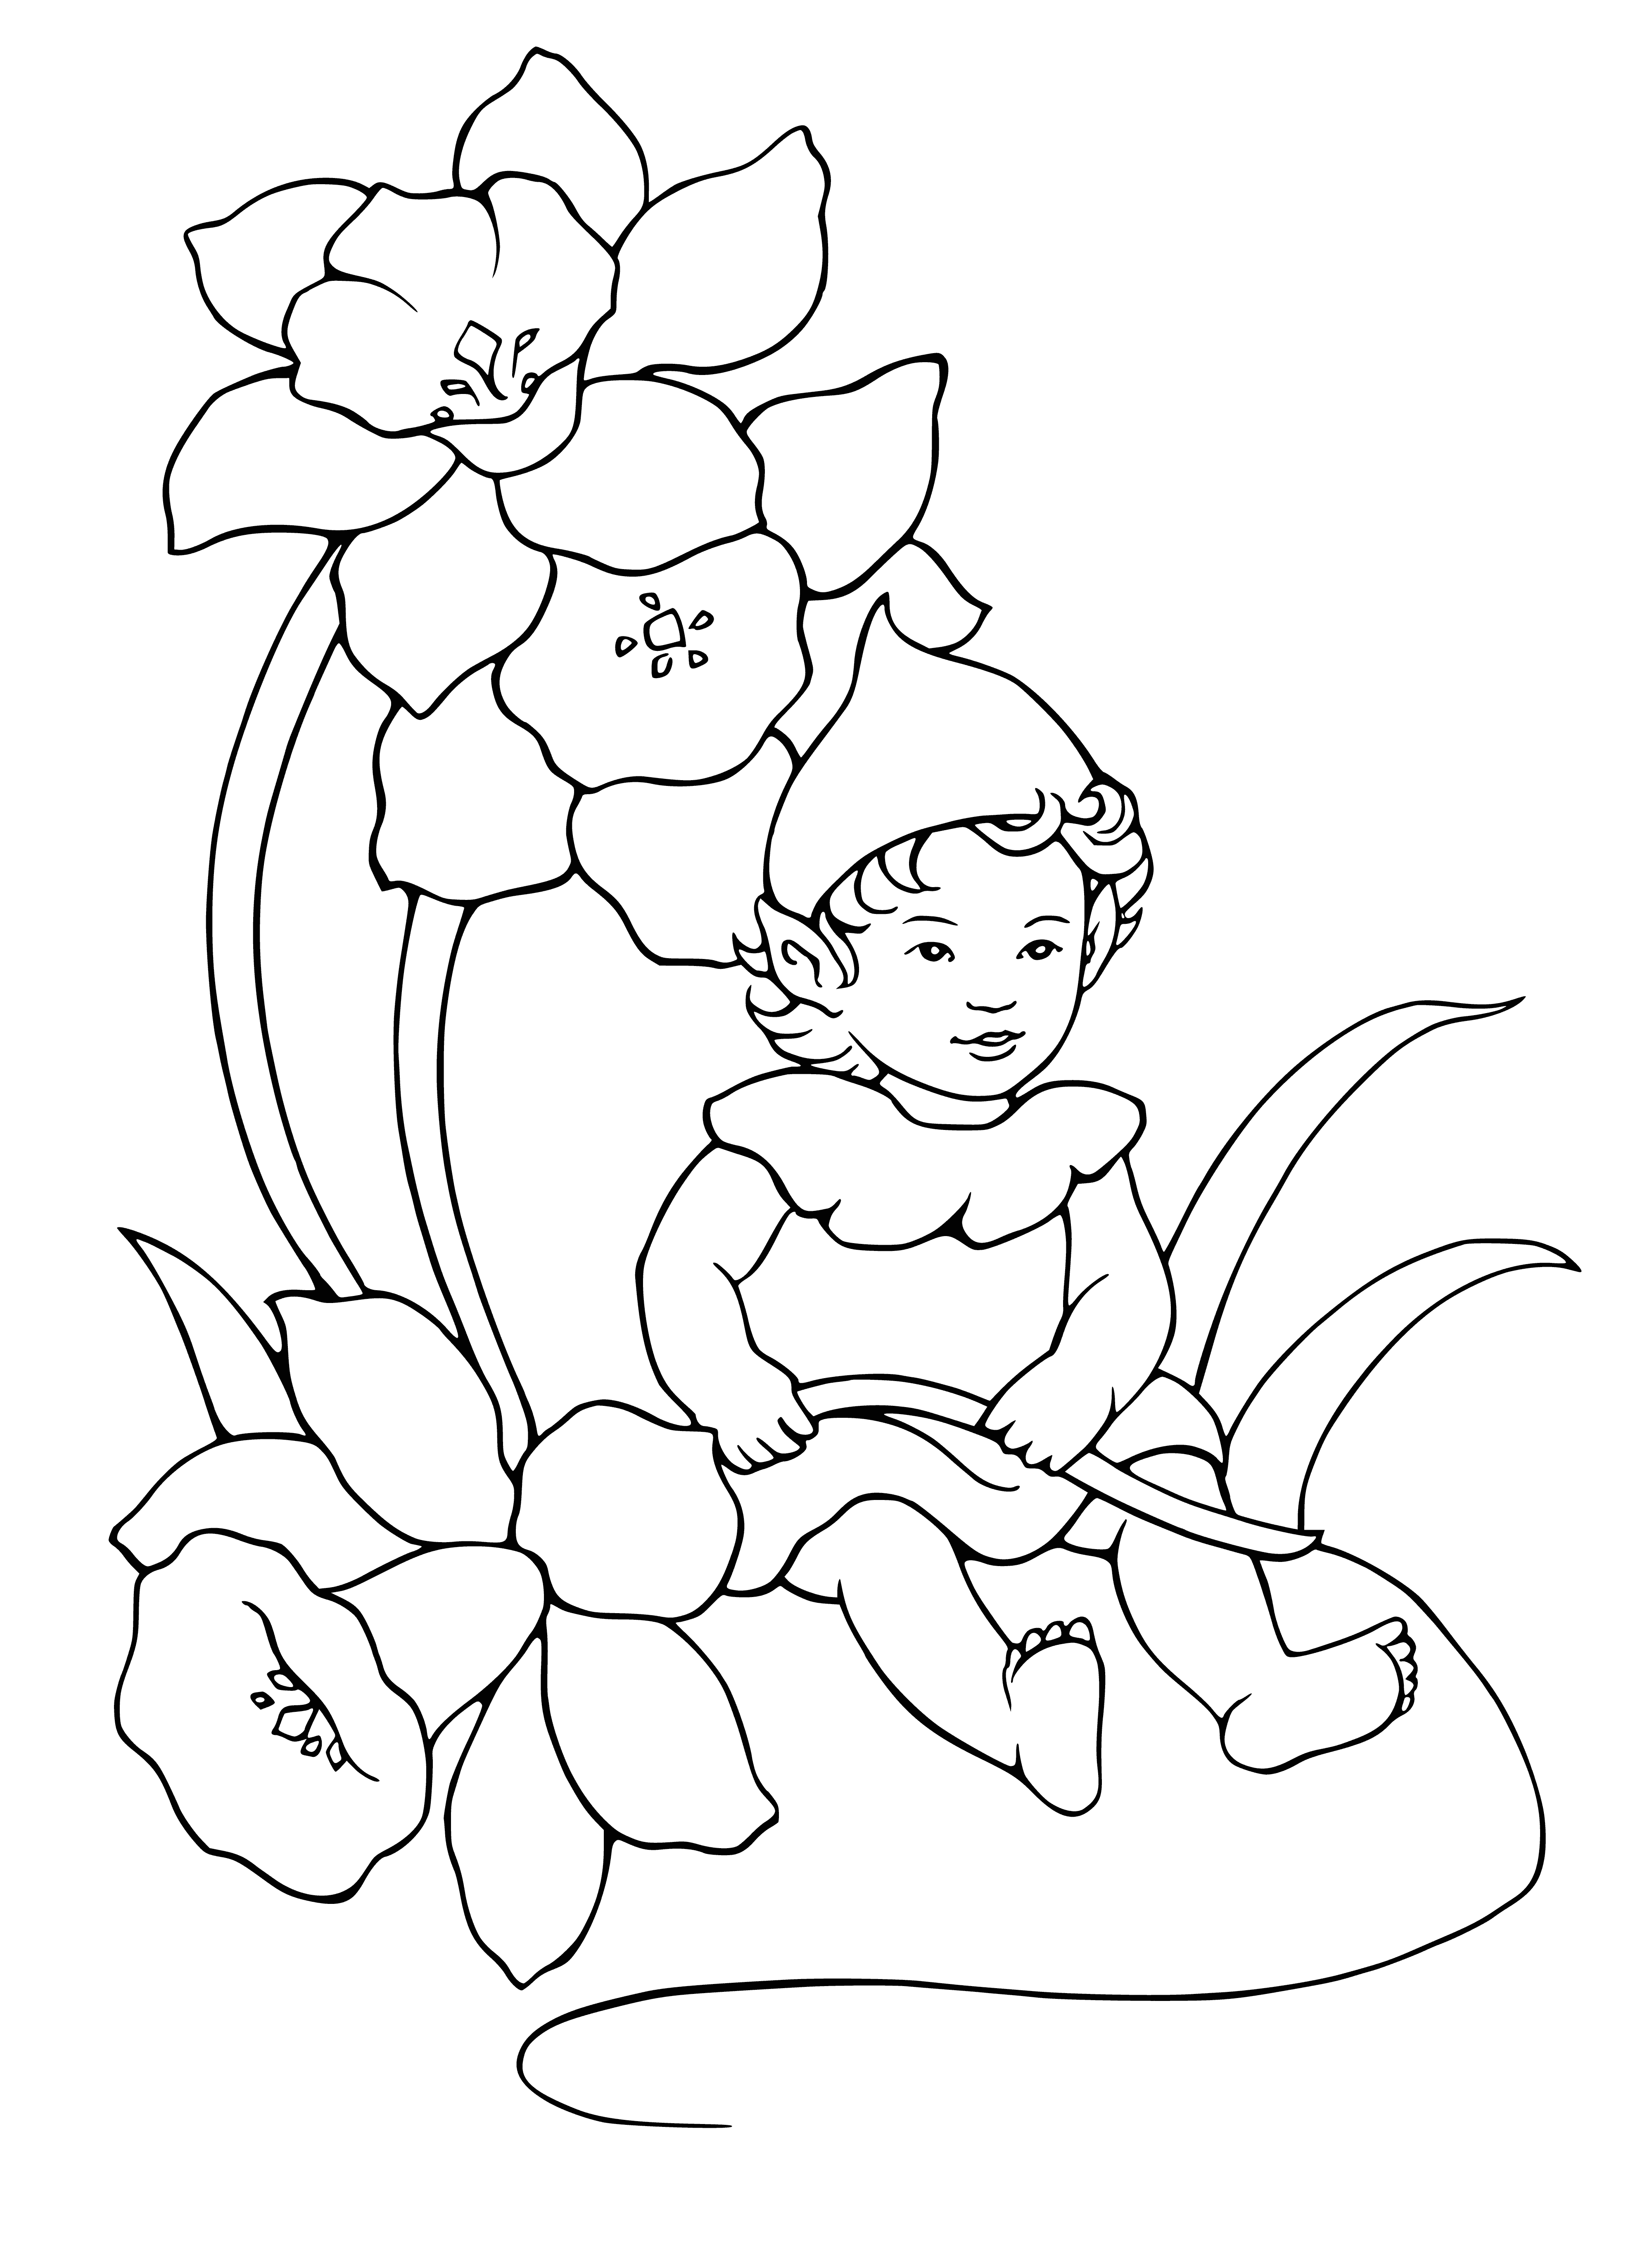 coloring page: Elves and fairies in a serene, magical setting, wearing traditional clothing and ethereal quality. #coloringpage